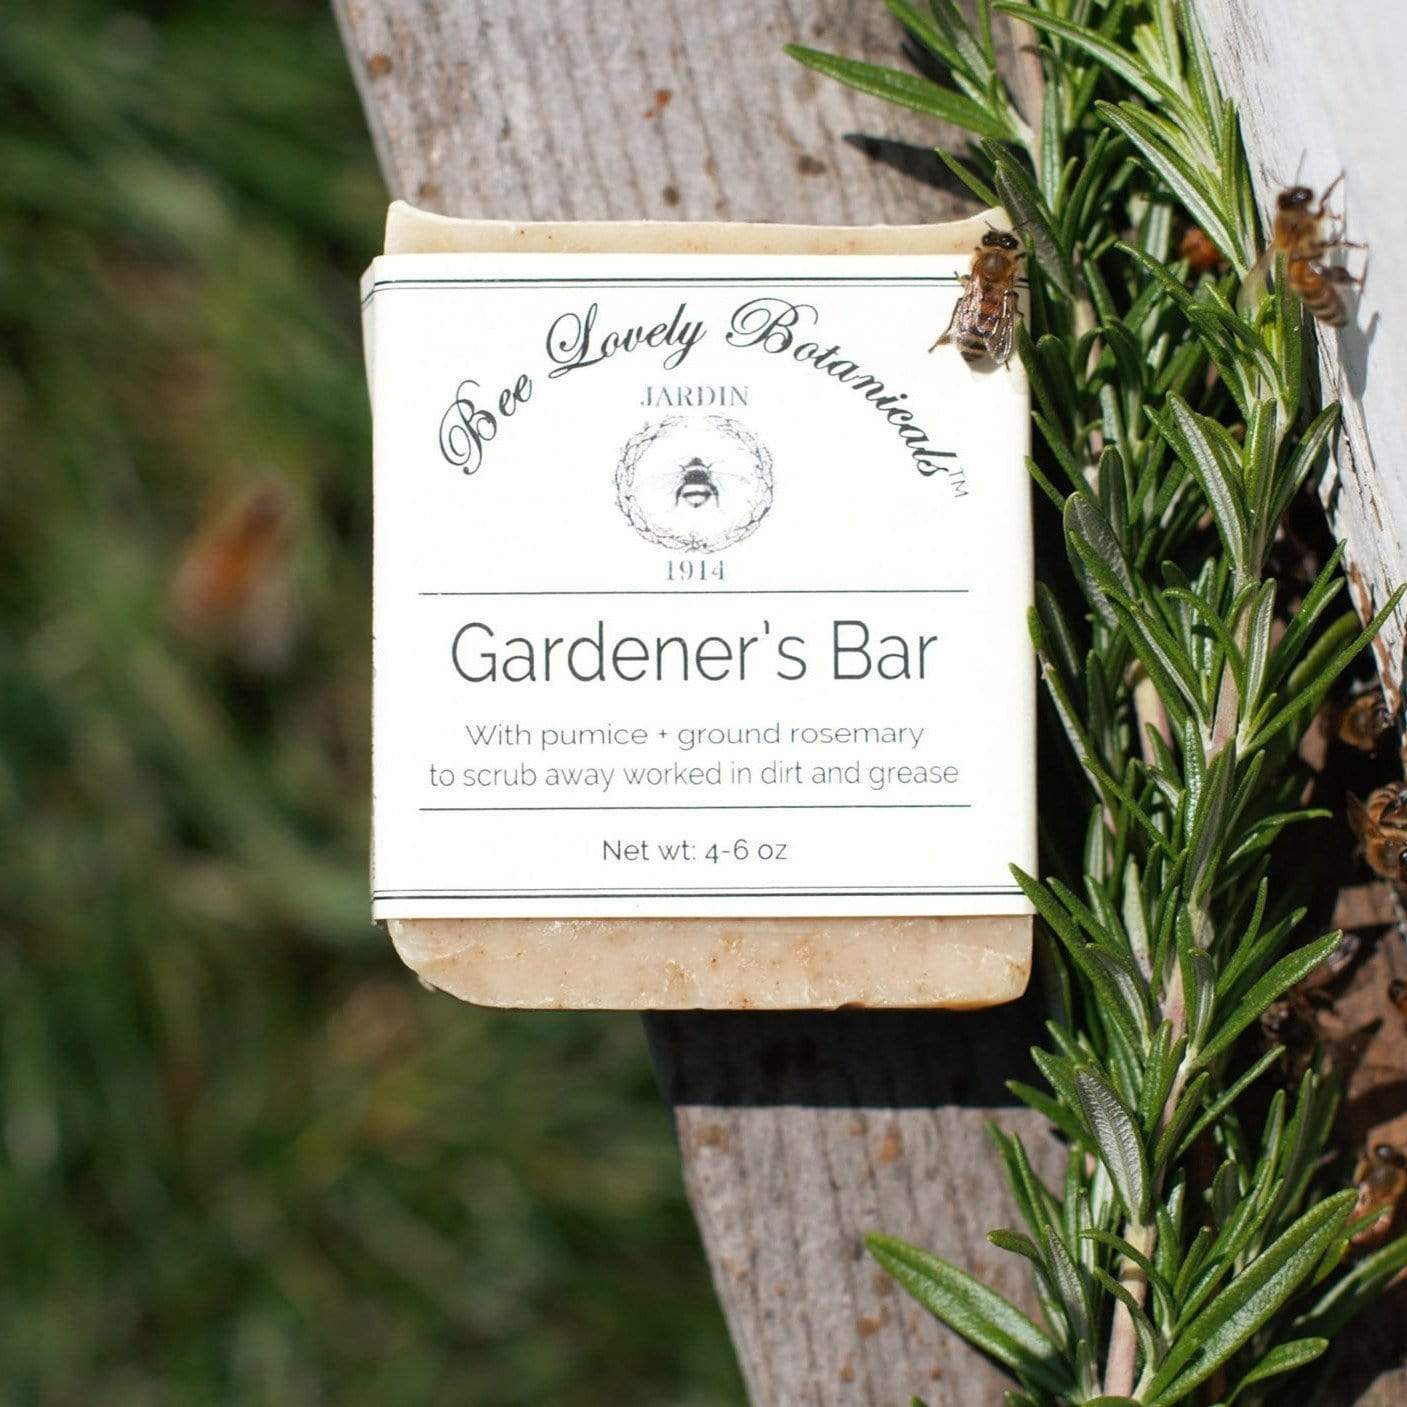 Gardener's Bar Soap with Pumice and Ground Rosemary